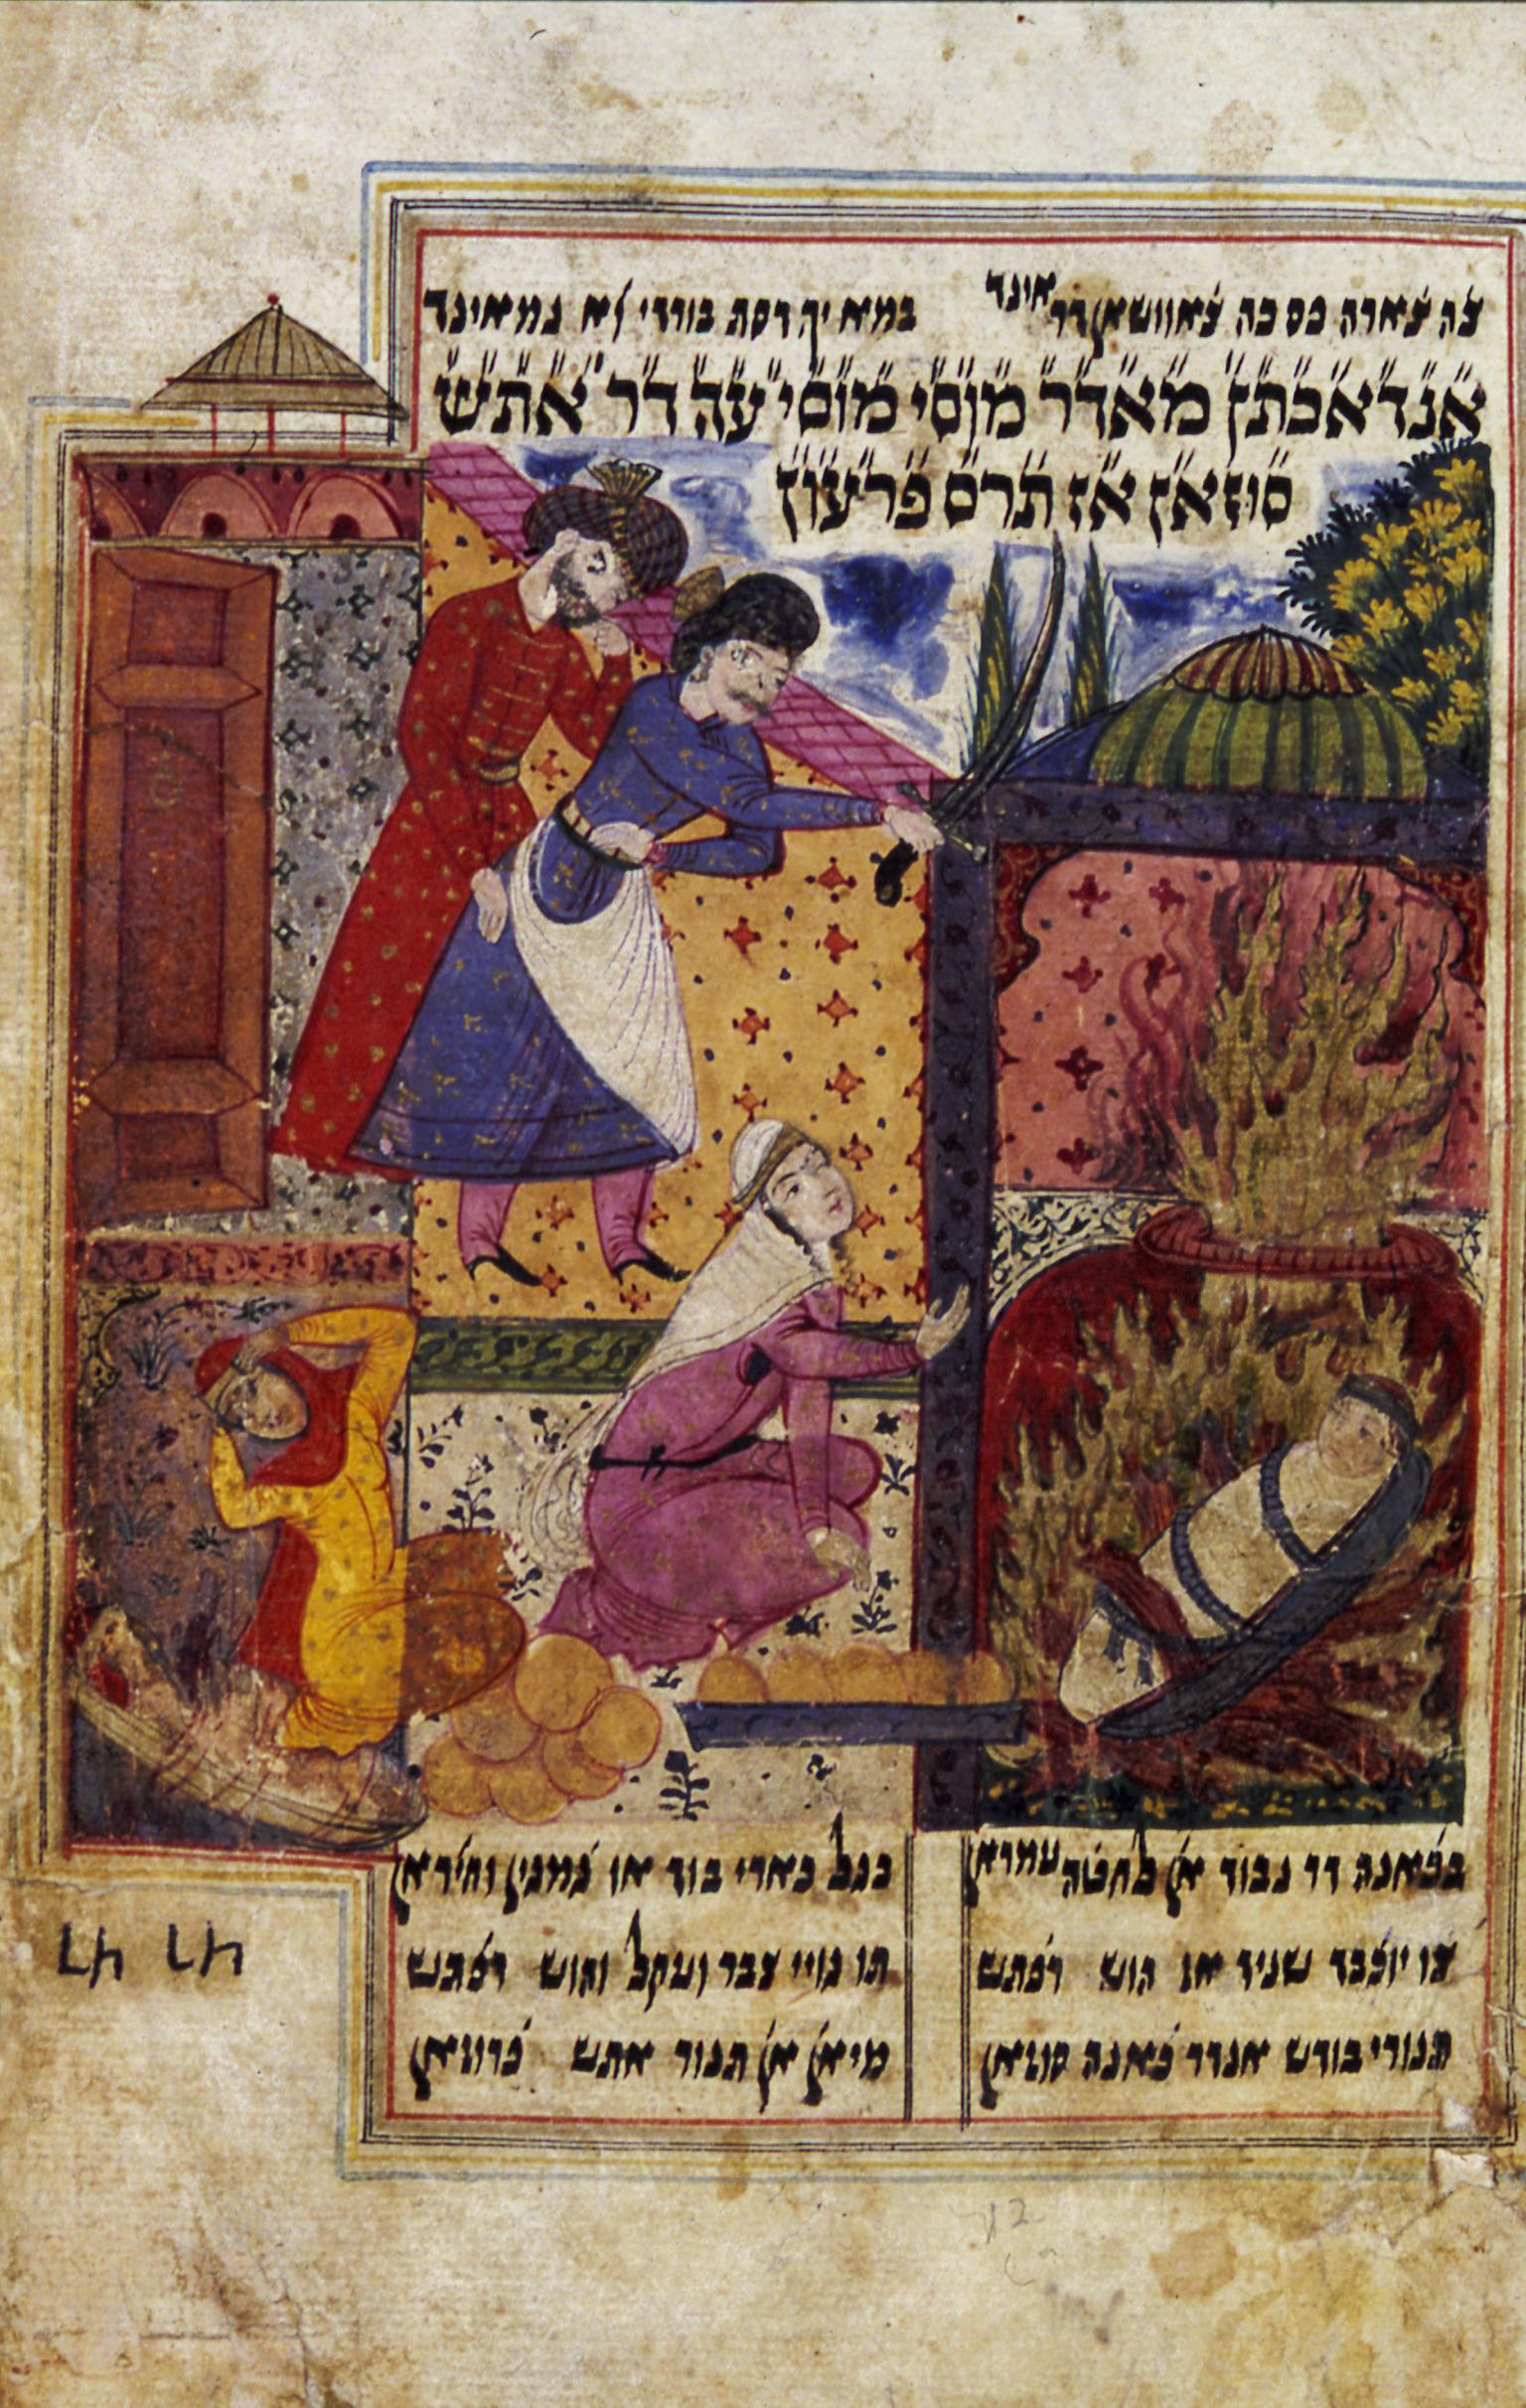 Manuscript page with illustration of a fire with baby in the middle, as a kneeling figure puts out a hand, and two standing figures look on, one with sword in hand, and another wailing figure kneels in the corner, with Judeo-Persian text on top and bottom of page.